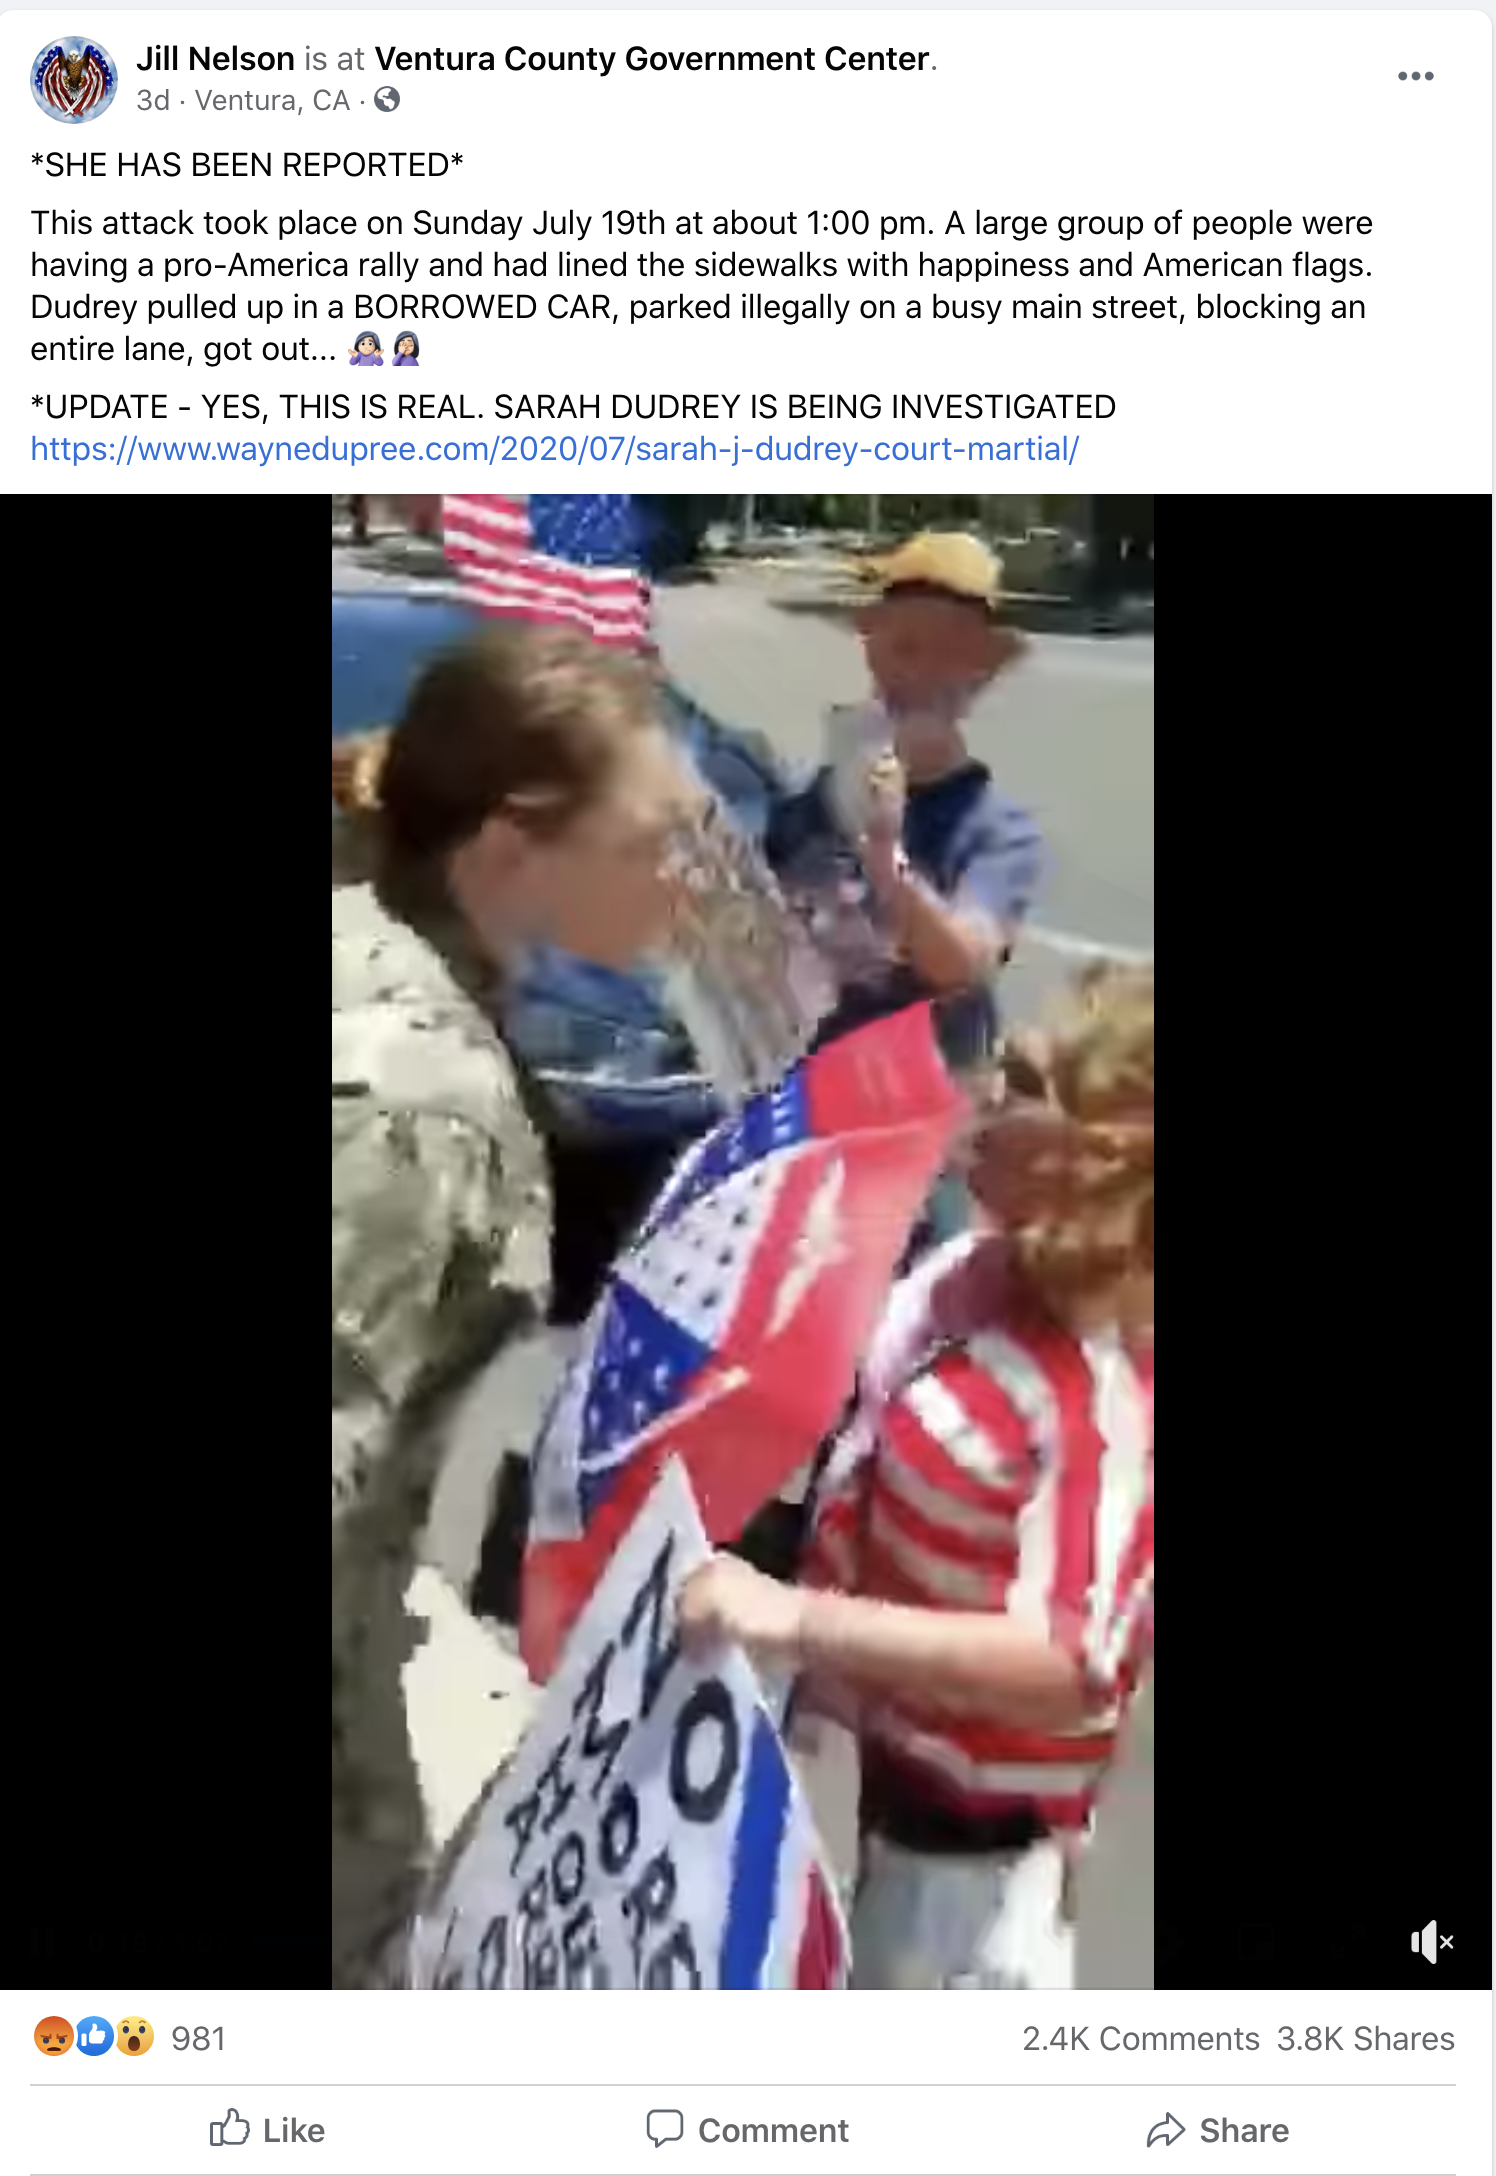 Screen-Shot-2020-07-23-at-10.45.49-AM Navy 'Hero' Sarah Dudrey Yells 'Fuck Trump!' & Goes Viral Fast Featured Military Politics Protest Top Stories 